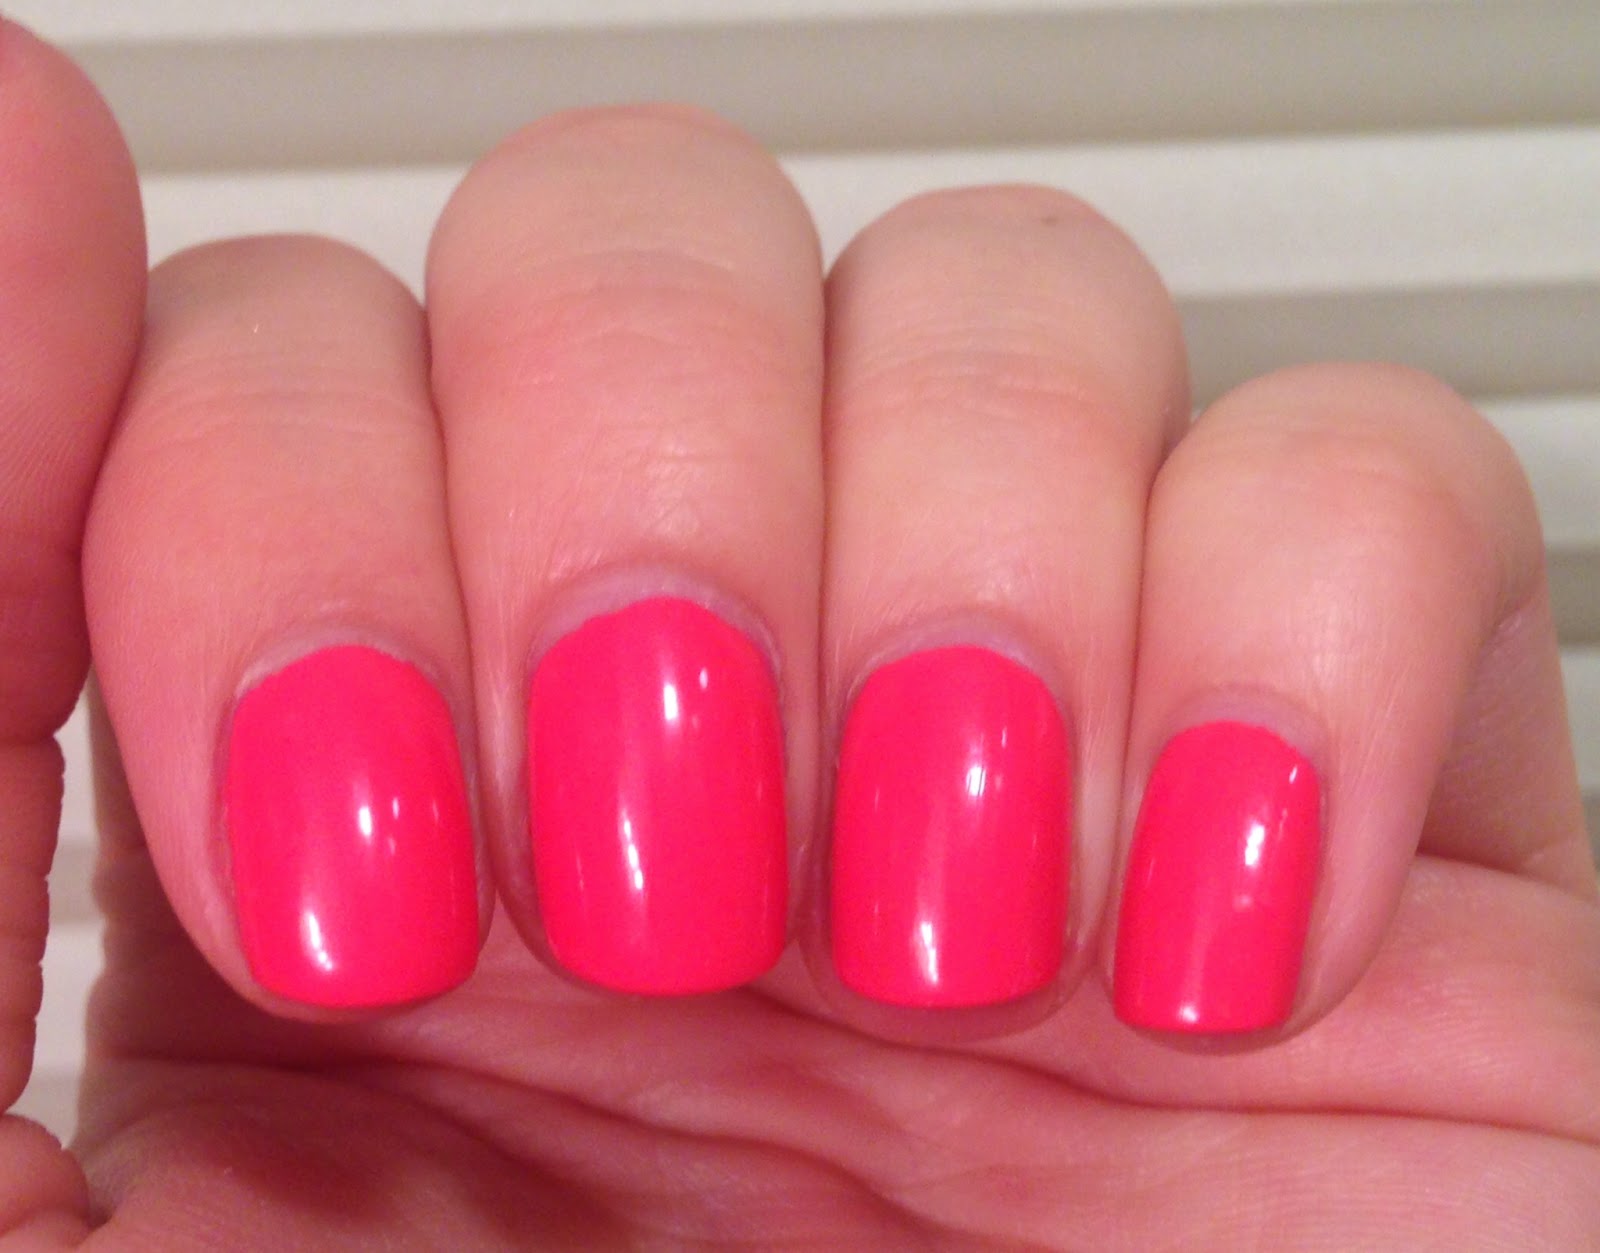 8. OPI Infinite Shine in "Suzi Without a Paddle" - wide 7